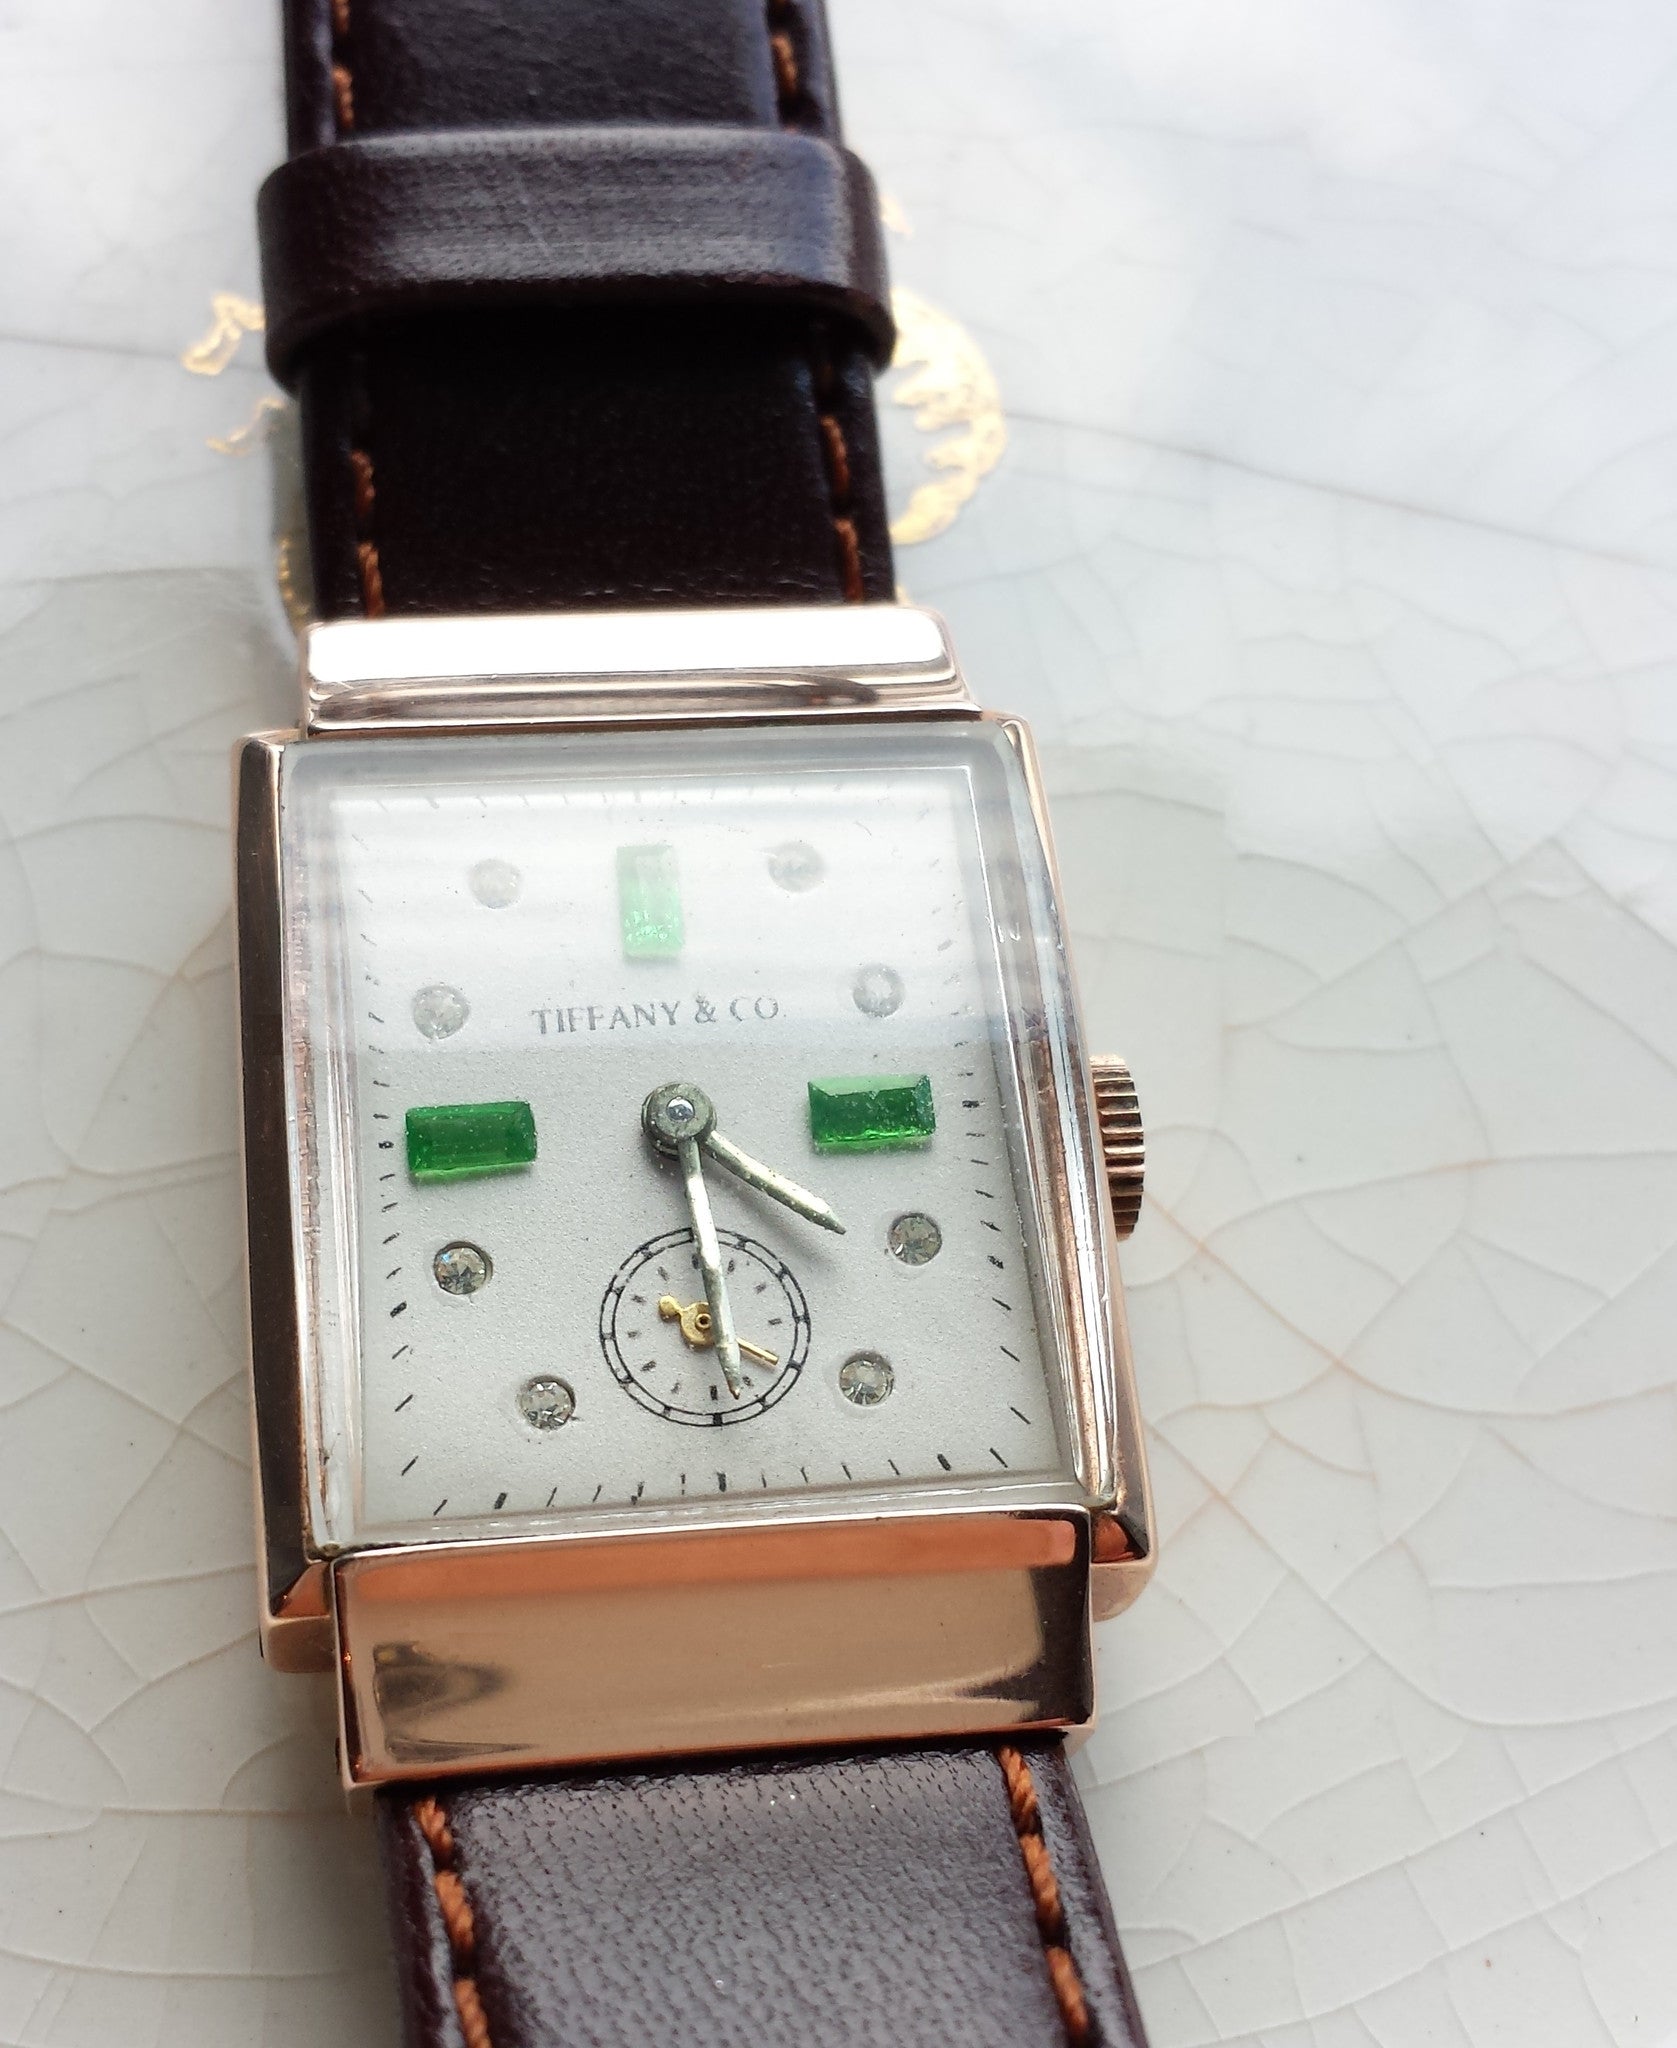 Tiffany & Co. 1940s Vintage Solid 14K Rose Gold Watch 17 Jewel, Swiss Movement